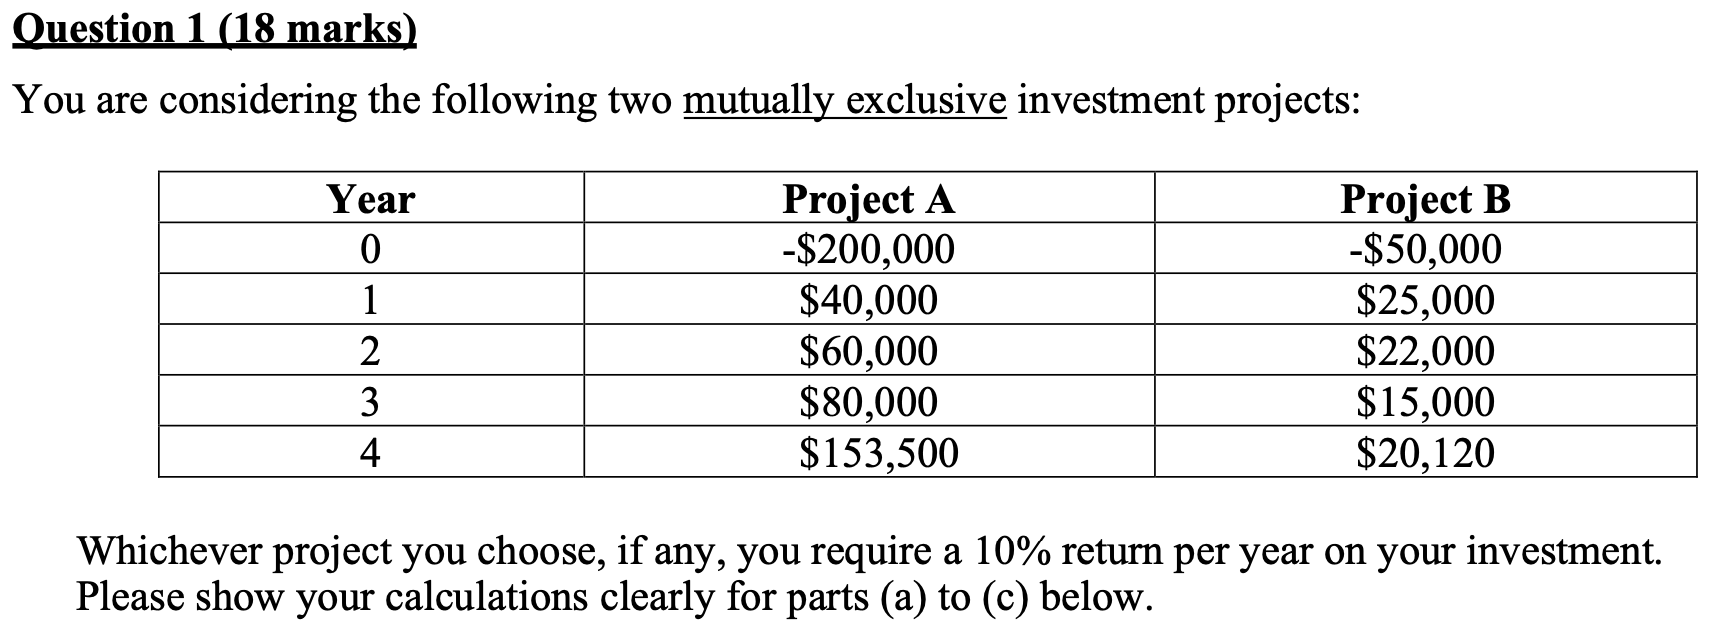 Question 1 (18 marks)
You are considering the following two mutually exclusive investment projects:
Project A
-$200,000
$40,000
$60,000
$80,000
$153,500
Project B
-$50,000
$25,000
$22,000
$15,000
$20,120
Year
3
4
Whichever project you choose, if any, you require a 10% return per year on your investment.
Please show your calculations clearly for parts (a) to (c) below.
